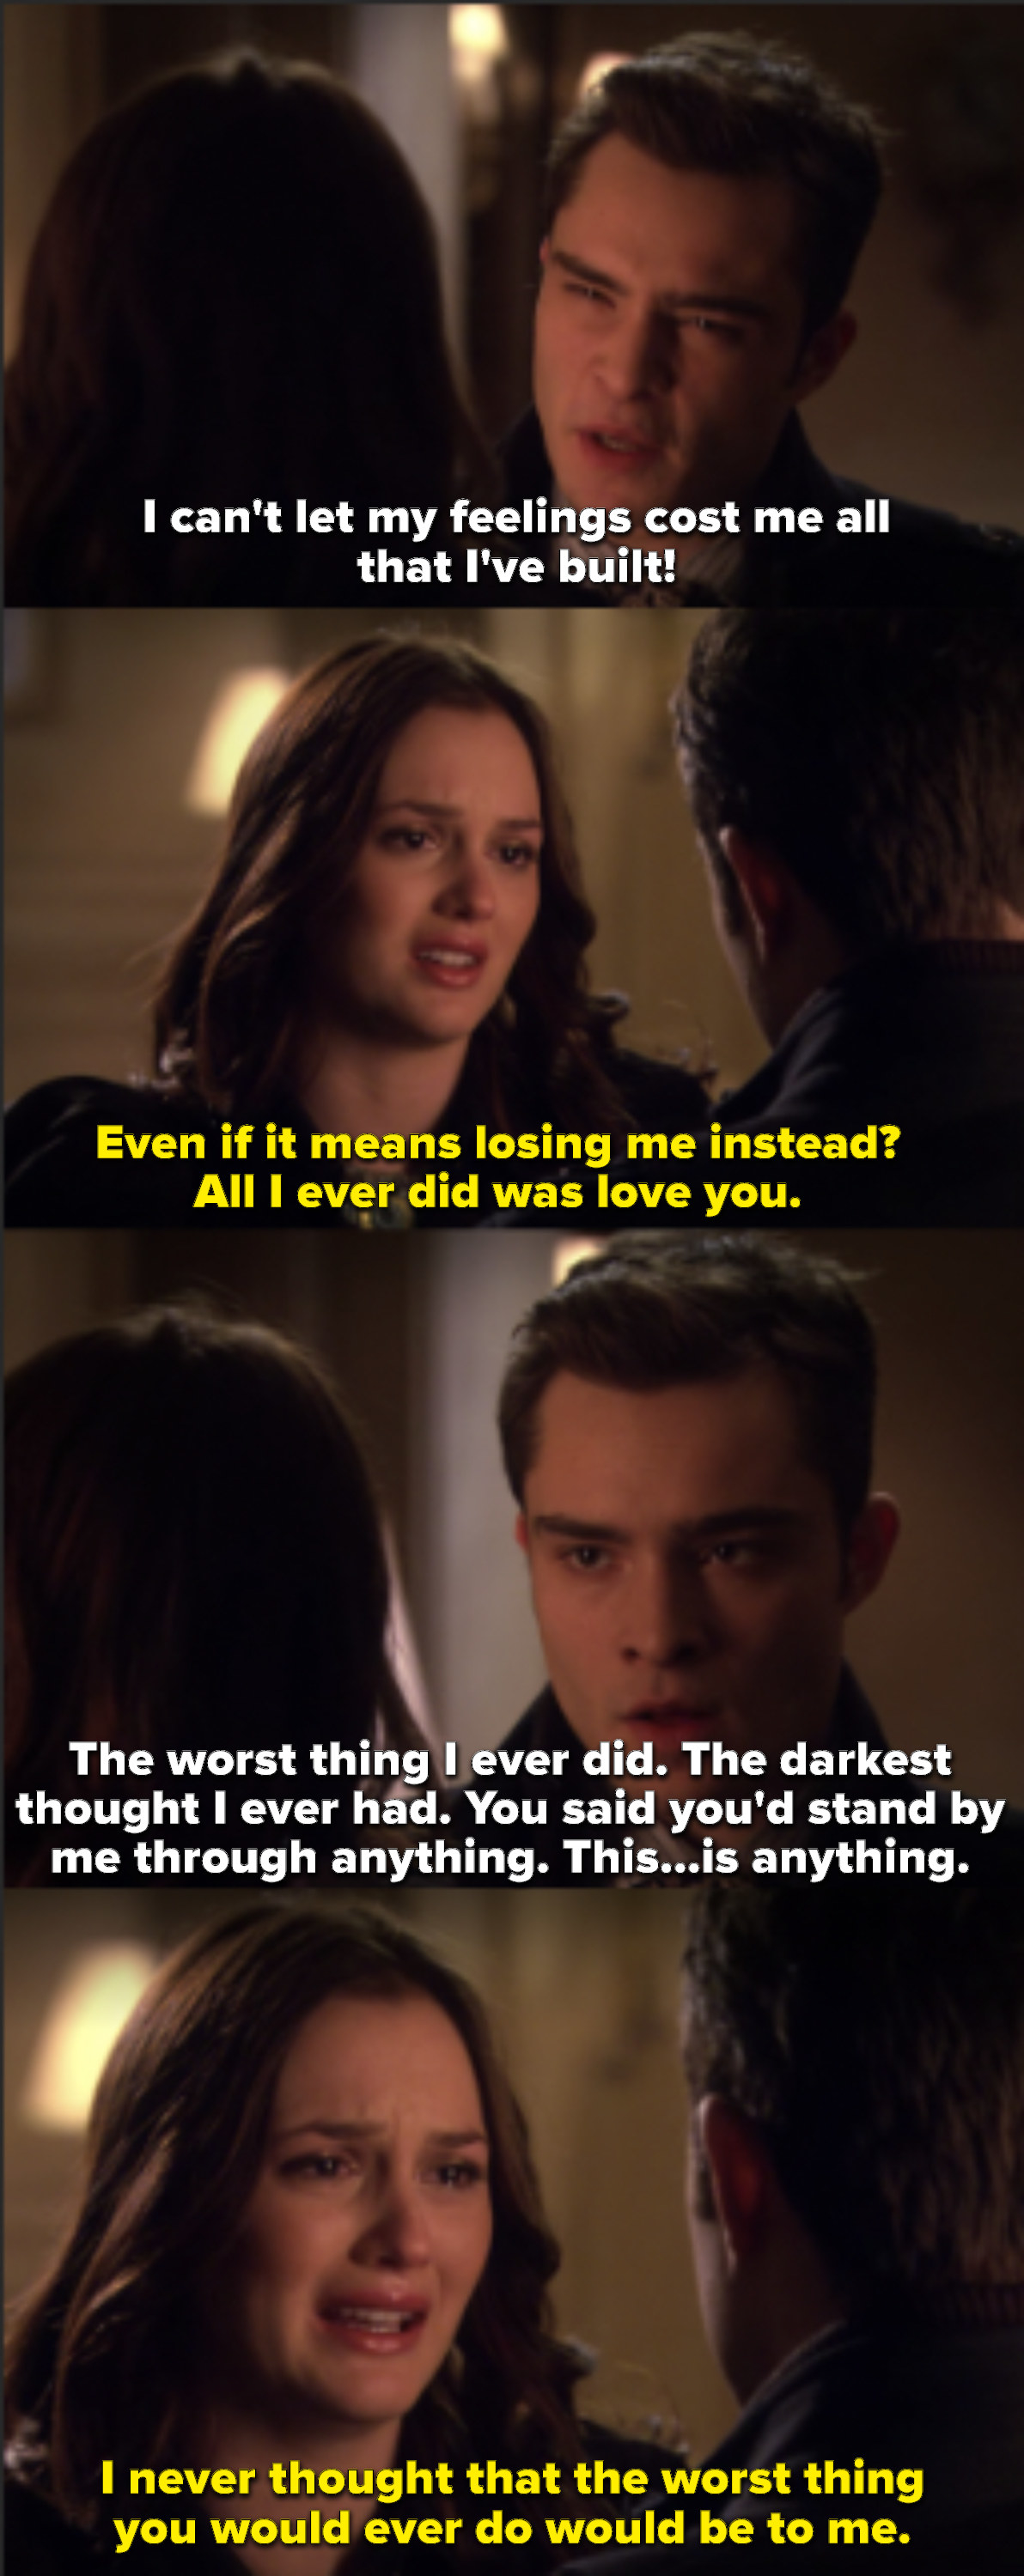 Blair says &quot;All I ever did was love you!&quot; Chuck replies that she said she&#x27;d stand by him through anything and Blair says she never thought the worst thing he&#x27;d ever do would be to her